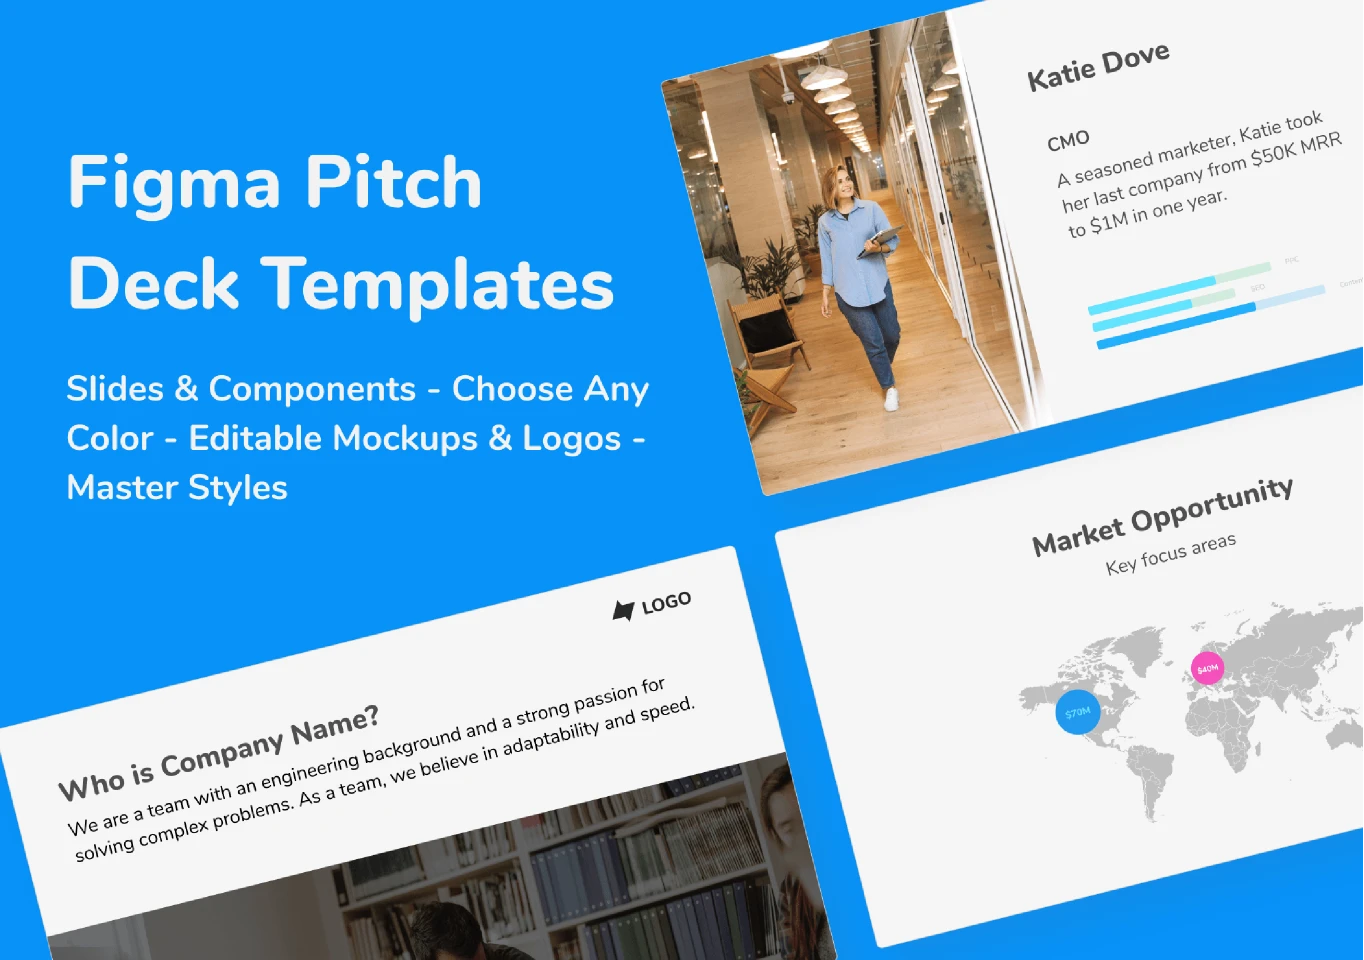 Figma Pitch Deck Template - Business Slide Deck for Figma and Adobe XD